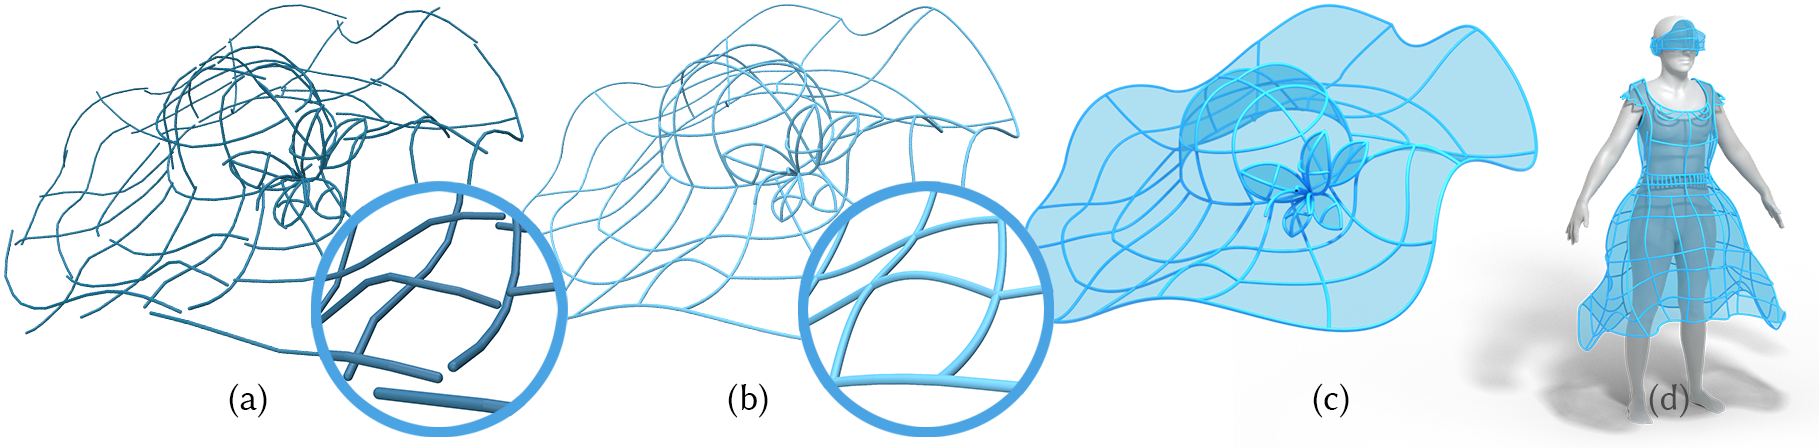 Example of a sketch done with CASSIE, where the input strokes (a) are automatically neatened to form a well-connected curve network (b) and surfaced (c). Other sketches done with our system are also showcased (d).